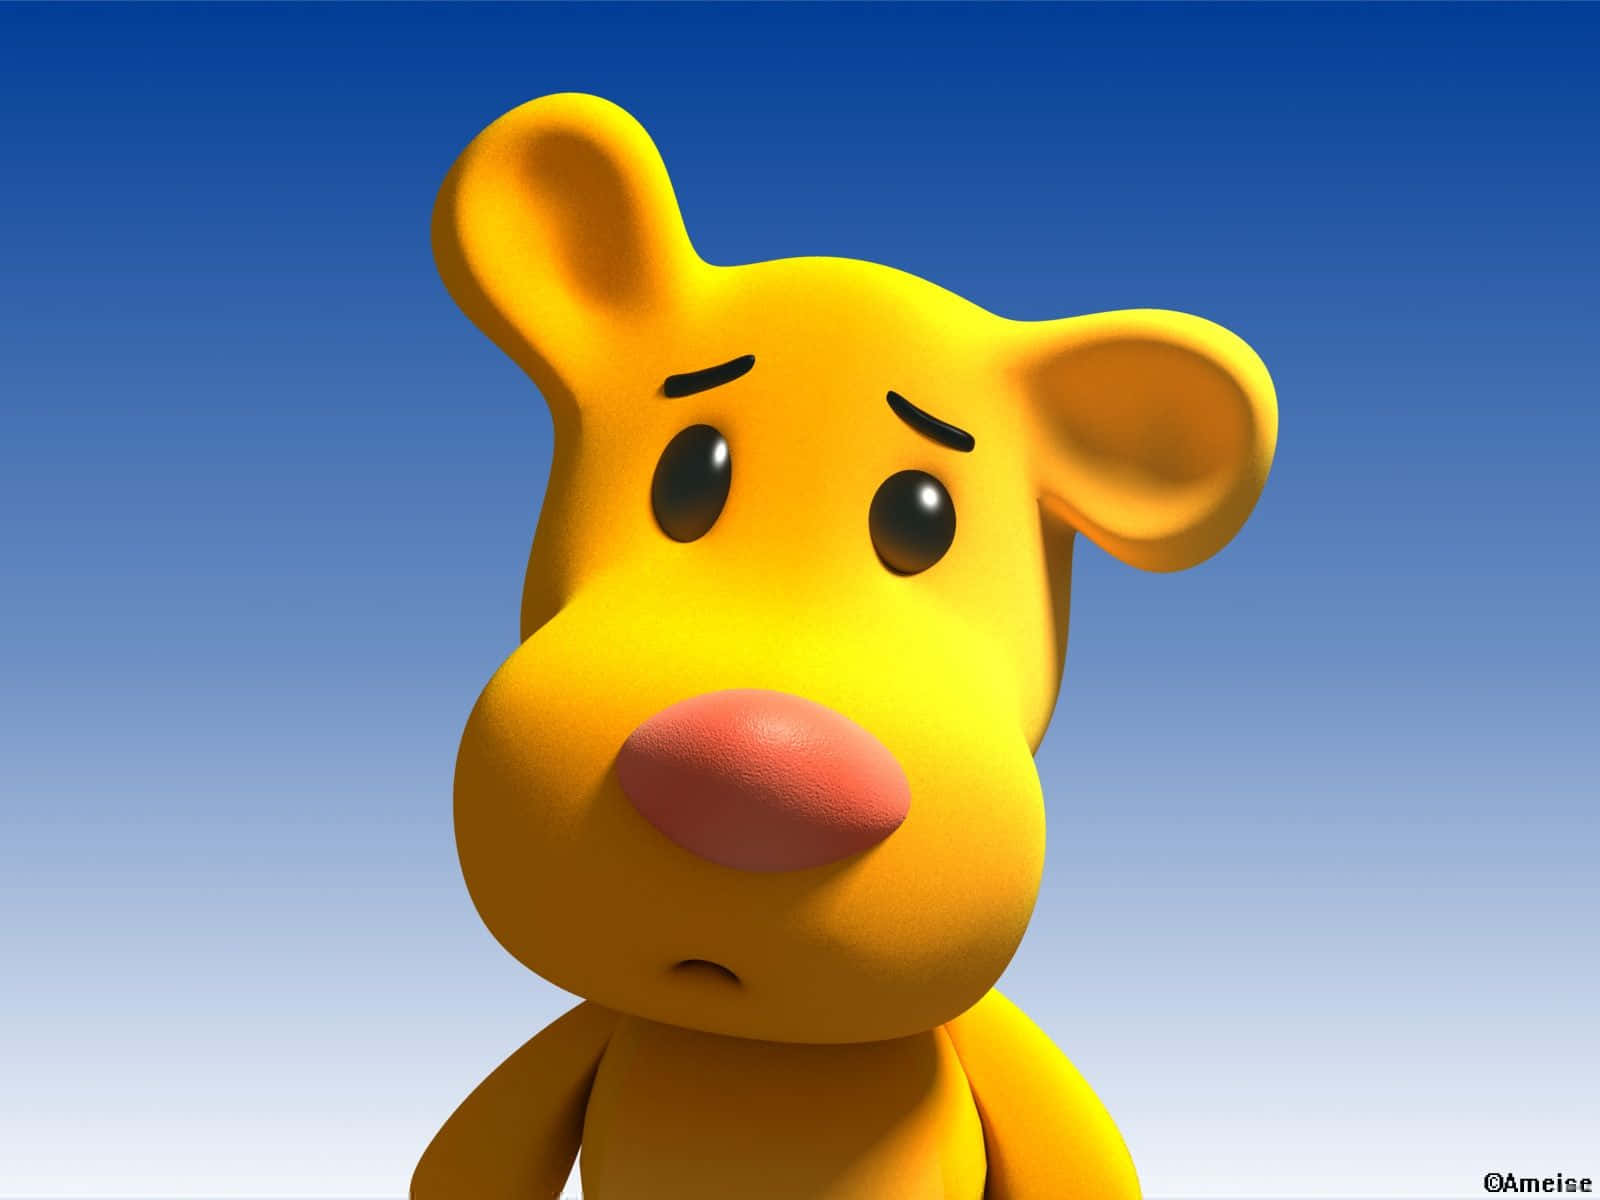 a yellow cartoon bear with a blue background